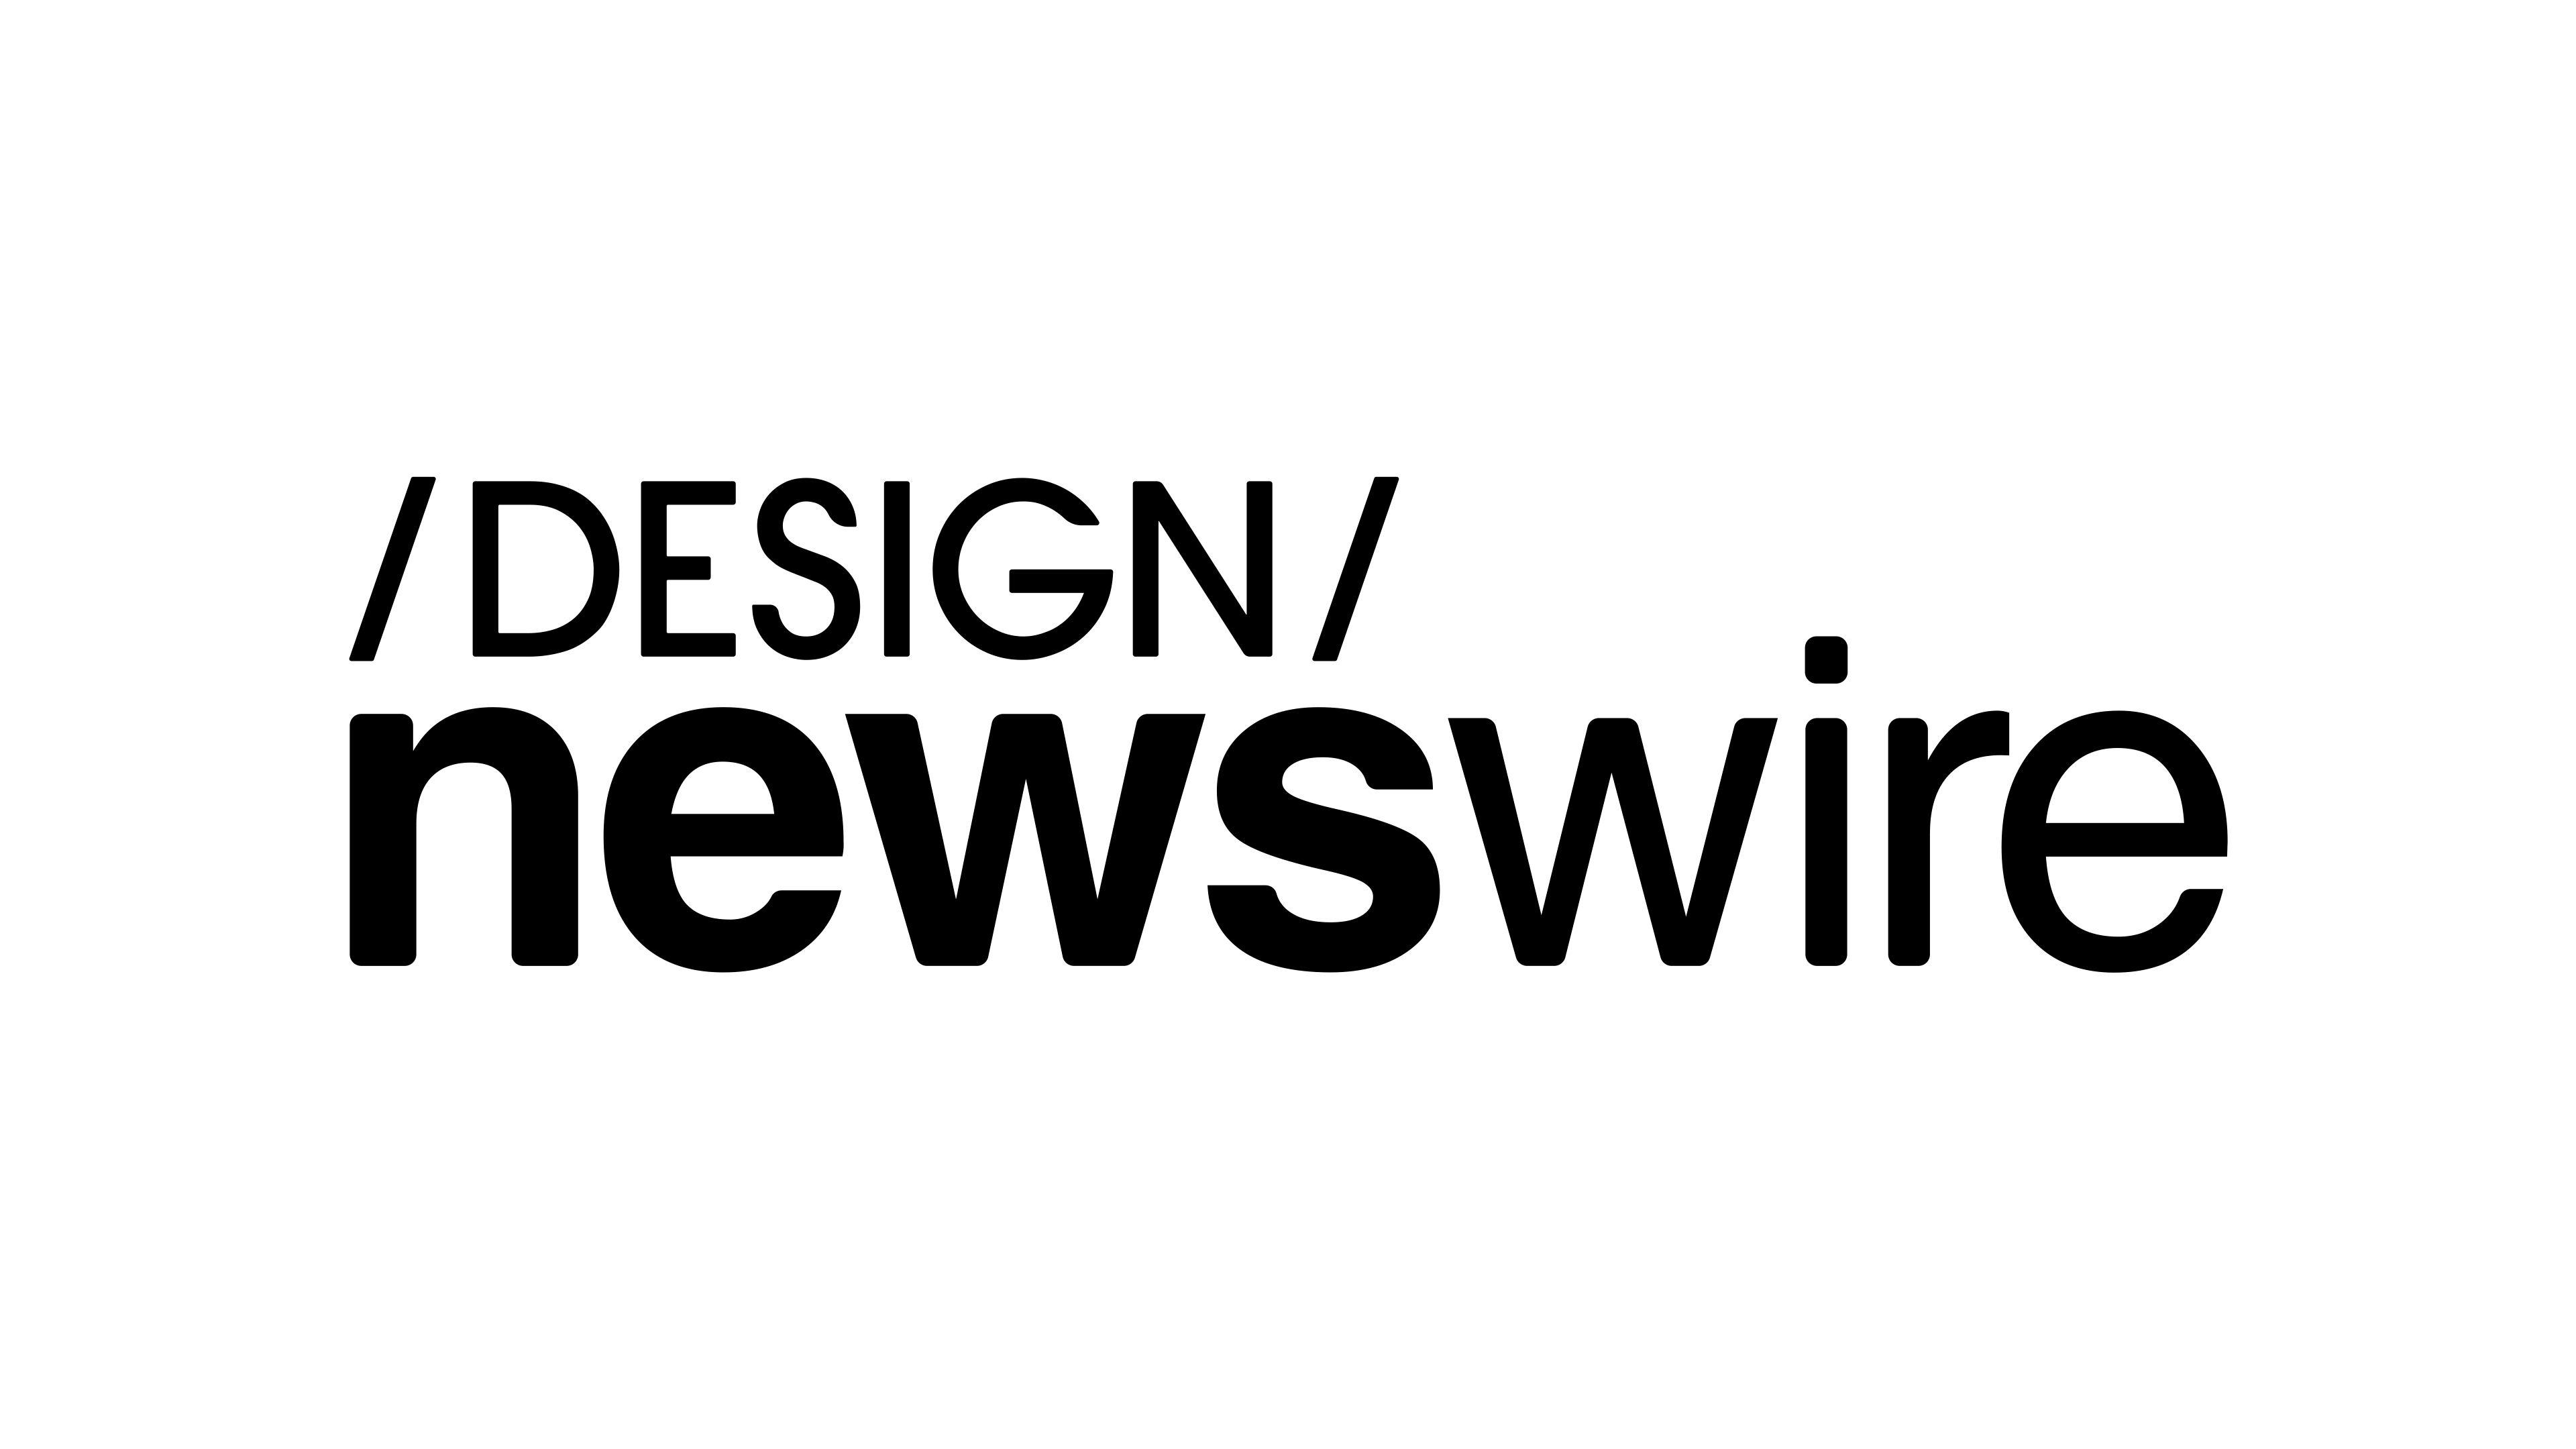 /DESIGN/Newswire: Your gateway to the latest news and insights from the design world